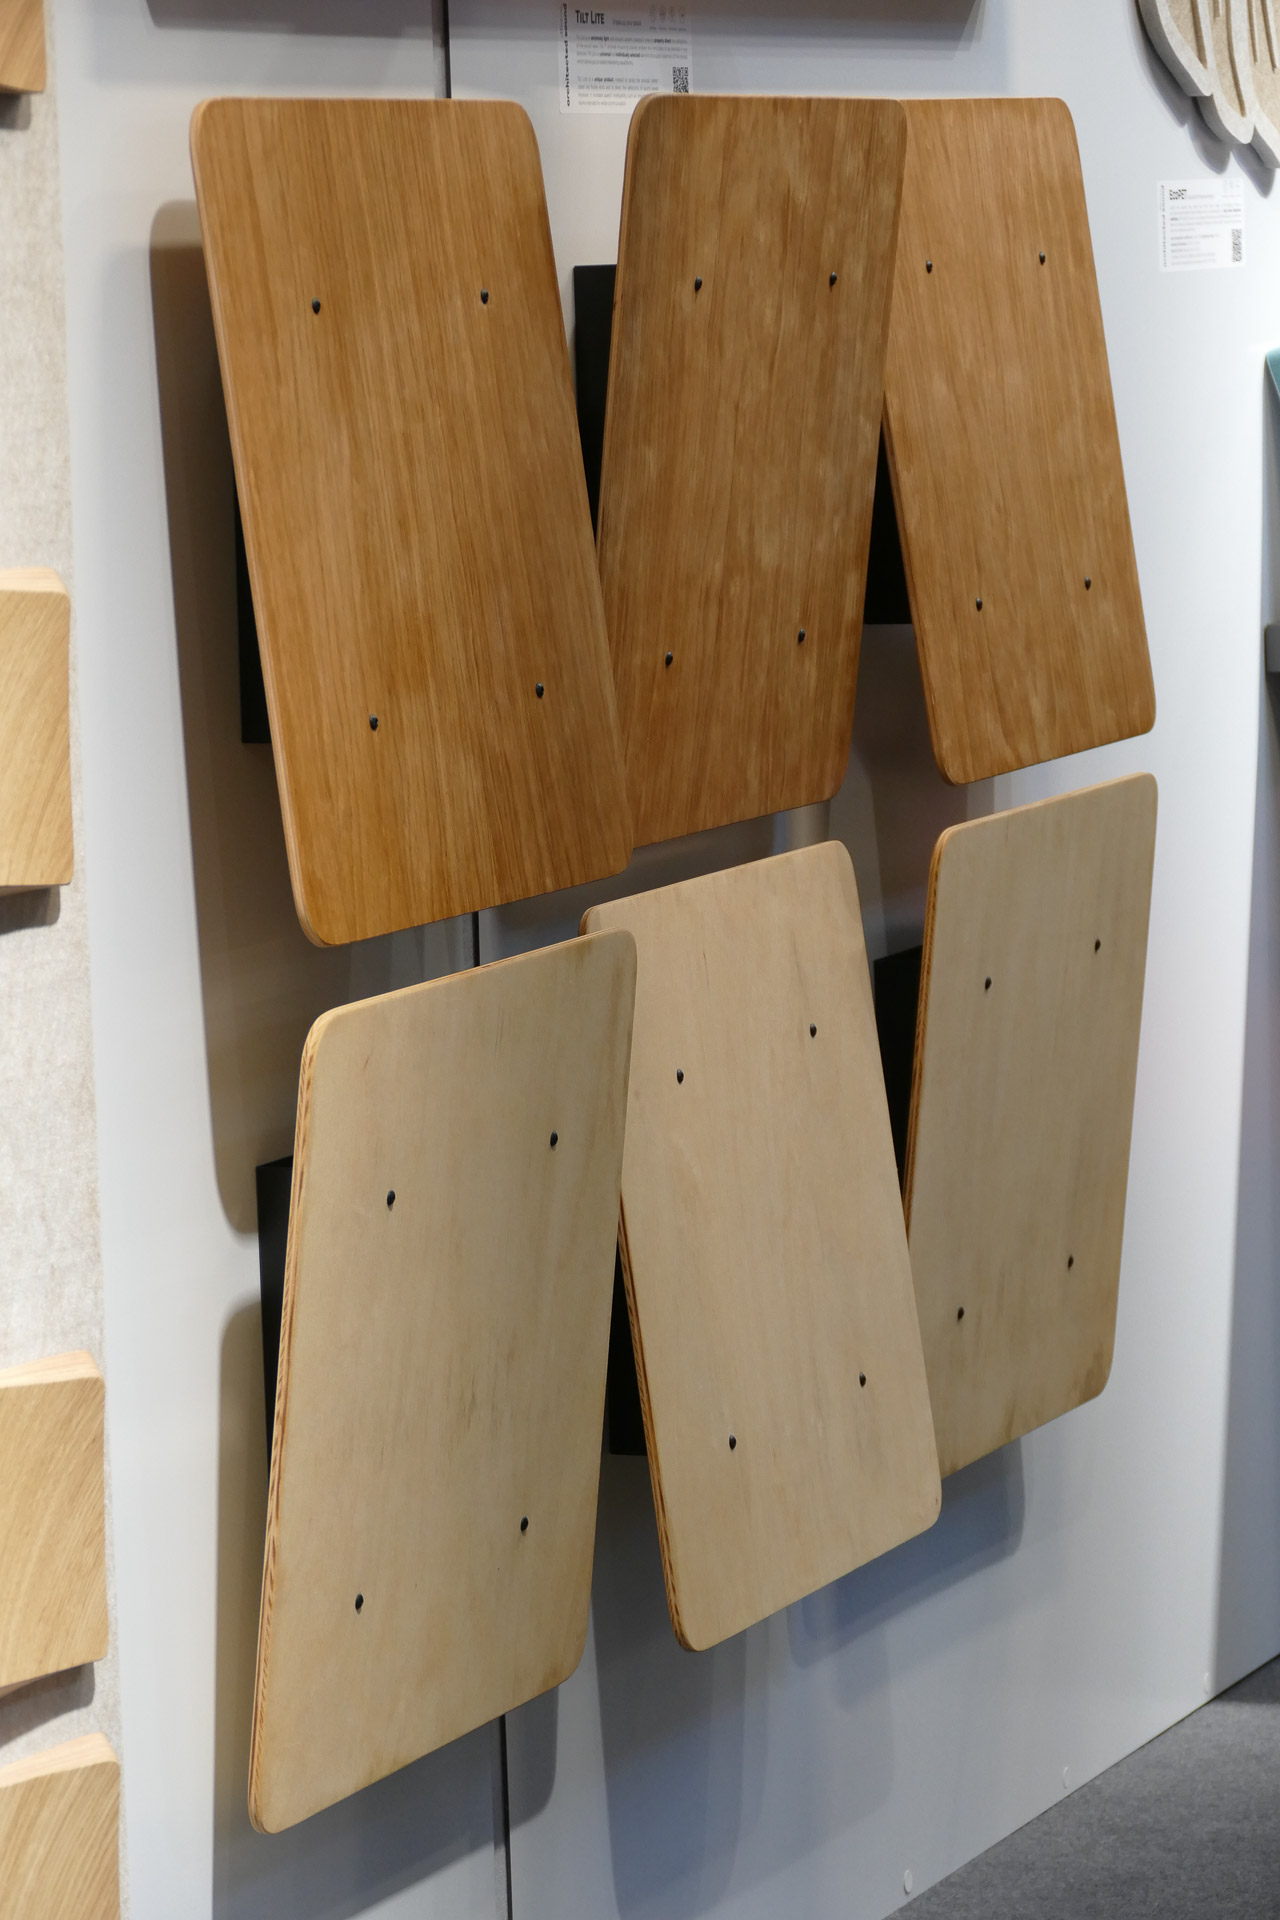 Sound reflective panel made from plywood